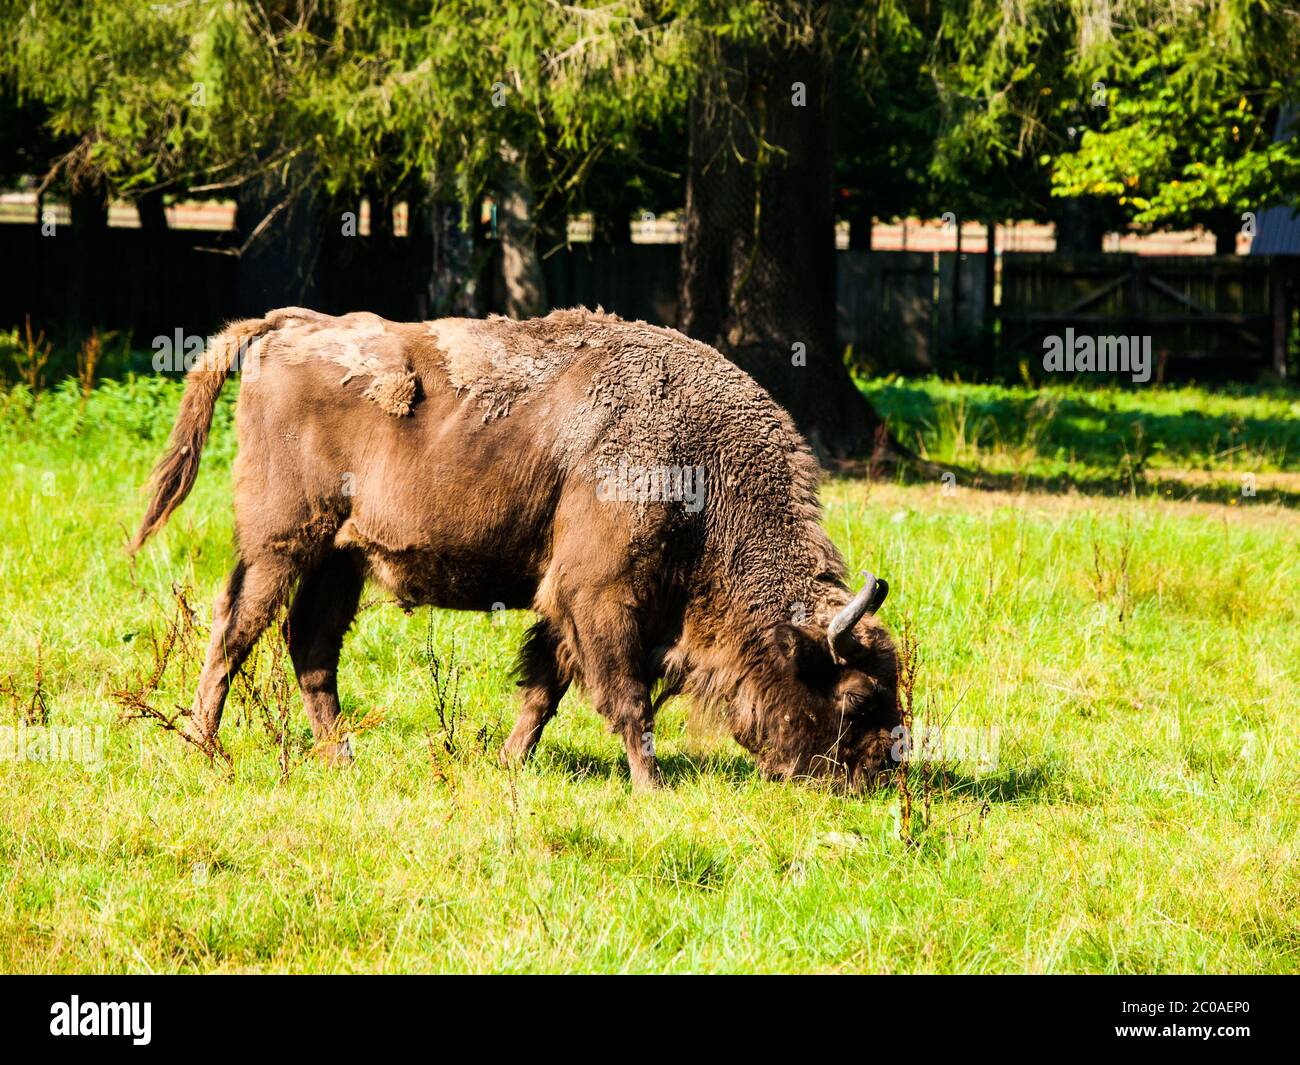 Endangered european wood bison, or wisent, in Bialowieza primeval forest, Poland and Belarus Stock Photo